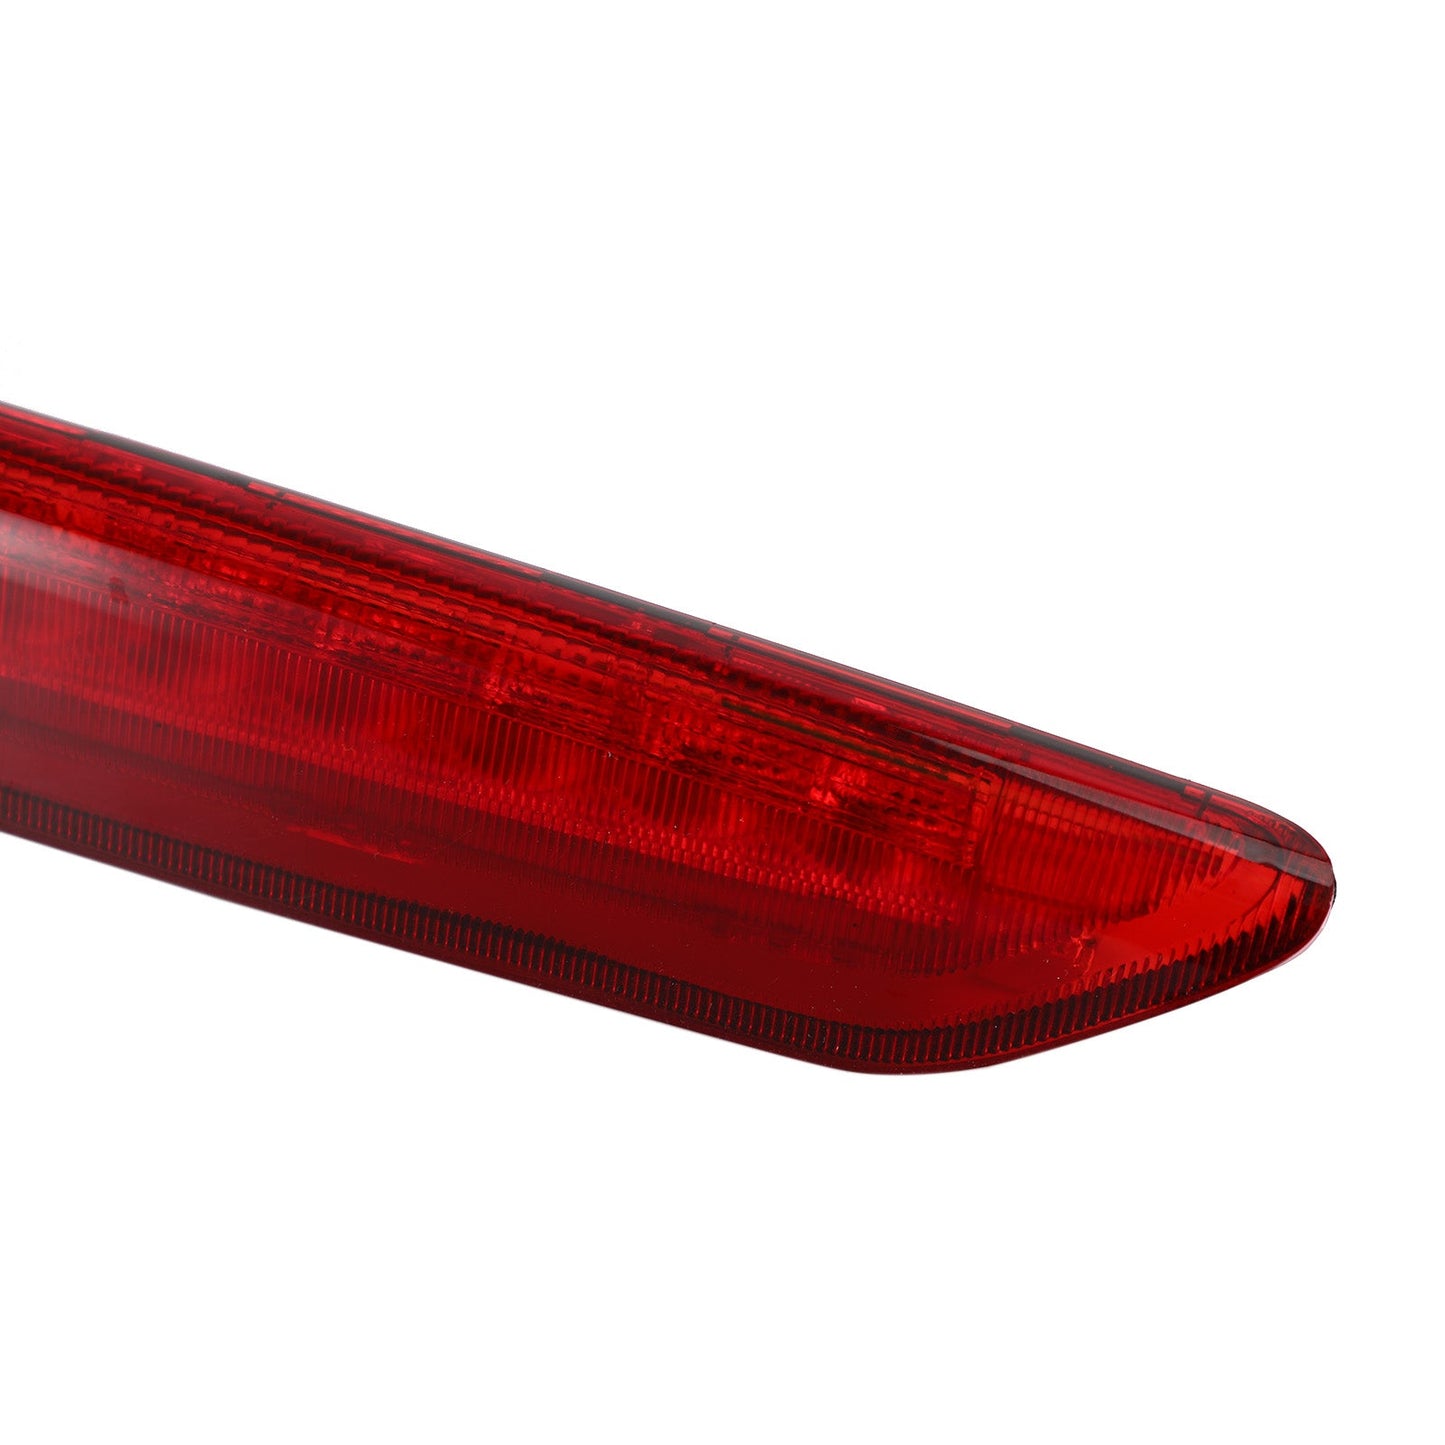 Third Brake Light High Mounted Stop Lamp Red For VW Polo 9N 2002-2010 6Q6945097